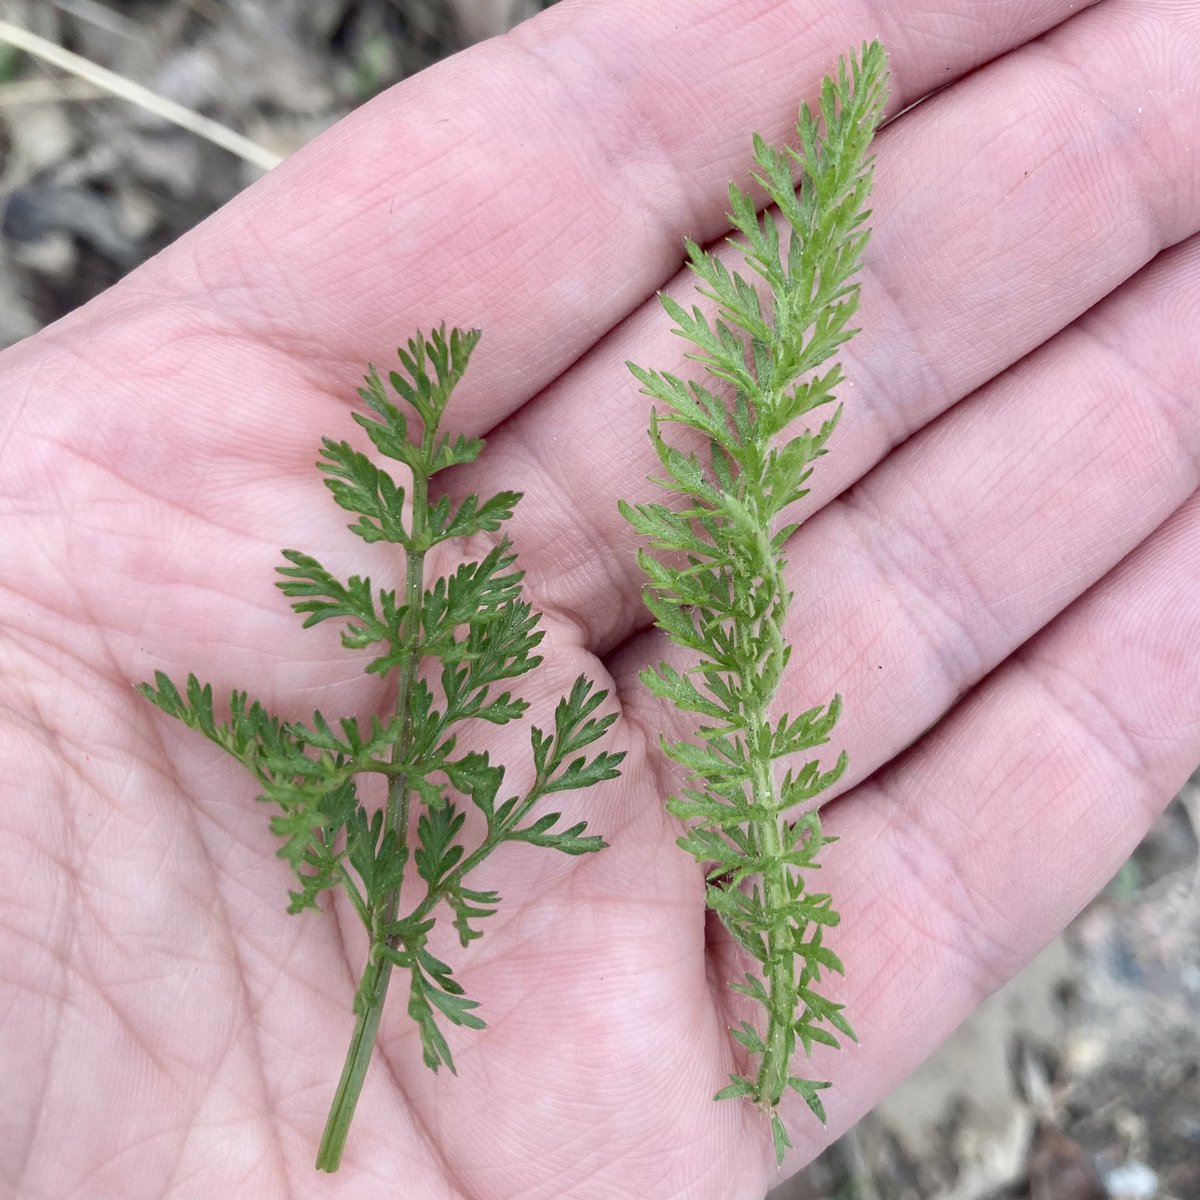 Two wild and weedy plants often mistaken for each other due to similar leaves and clustered white flowers on tall stems. 

Left: Queen Anne’s Lace (wild carrot)

Right: Yarrow

#edibleplants #wildedibles #plantidentification #foraging #wildharvesting #wildcrafting